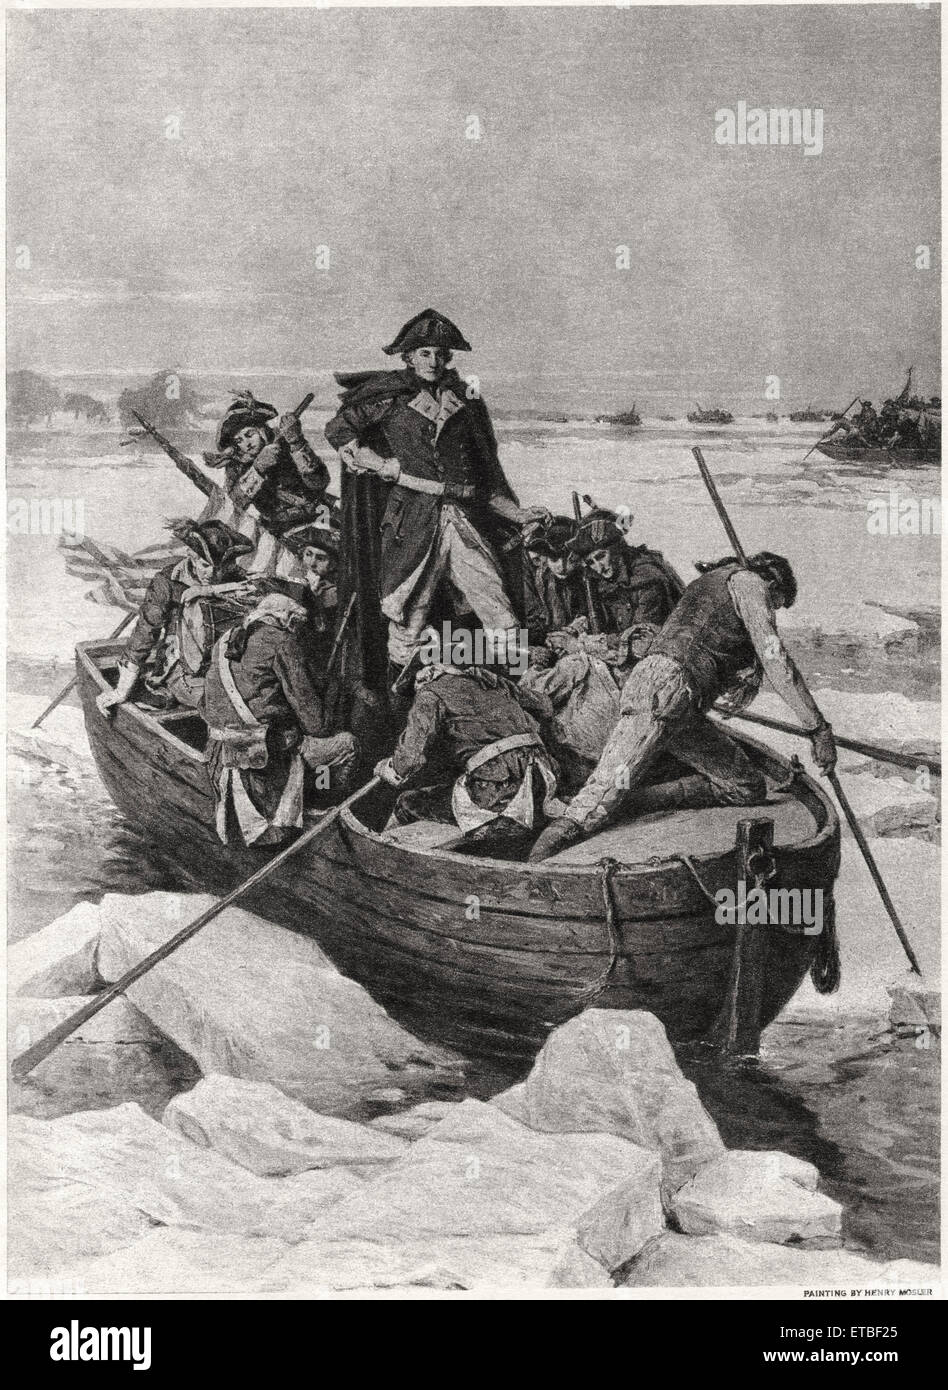 Washington Crossing the Deleware, McConkey’s Ferry, The Battle of Trenton, 26 December 1776, Painting by Henry Mosler circa 1912, Printed 1913 Stock Photo